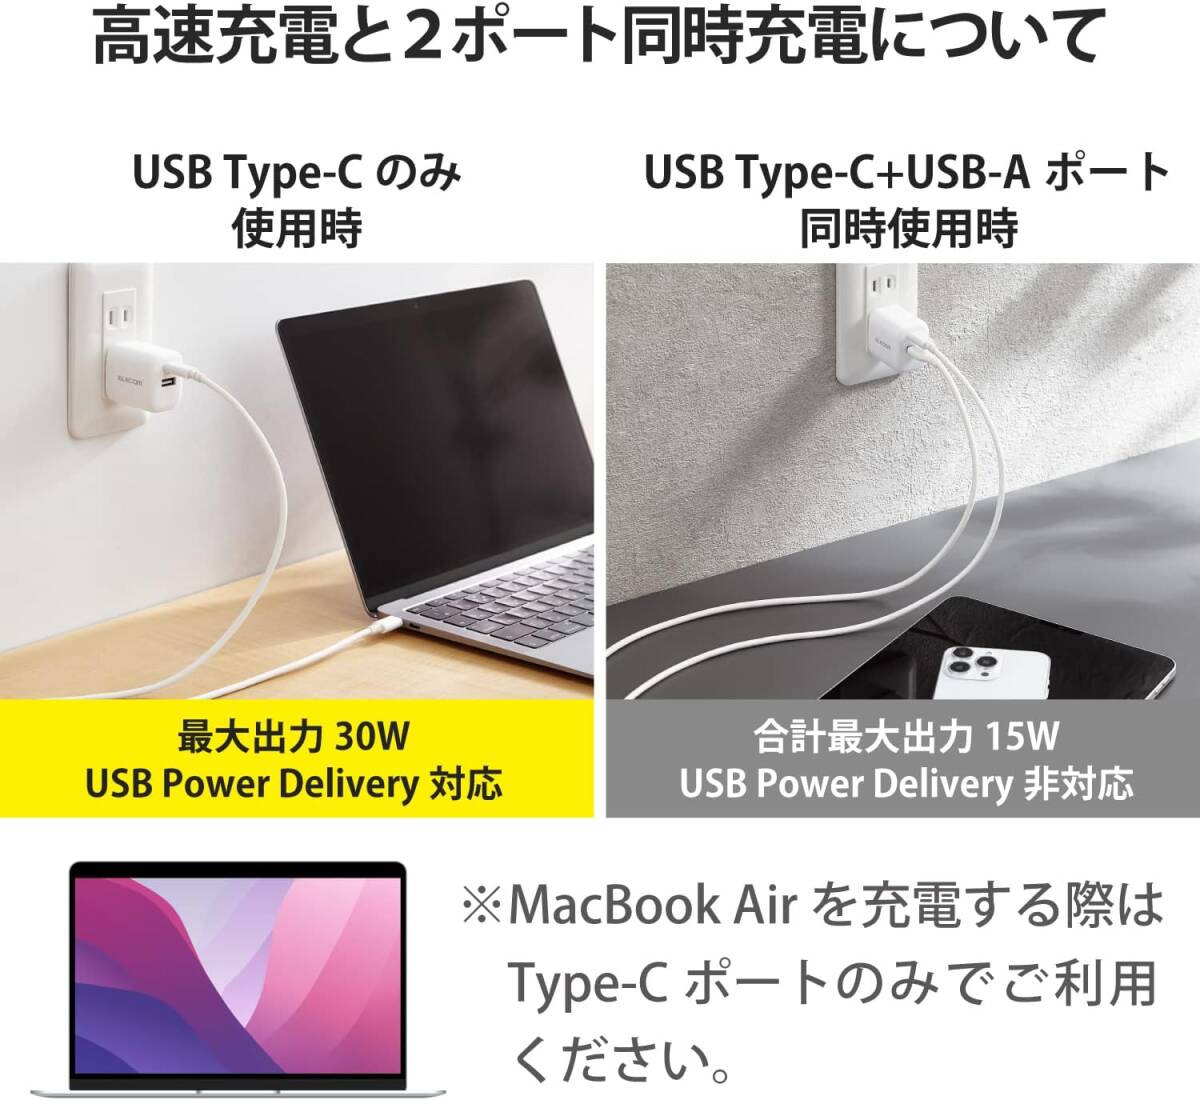  white 1) charger single unit Elecom fast charger Type-C USB PD correspondence 30W 2 port (USB-C/USB-A) small size 